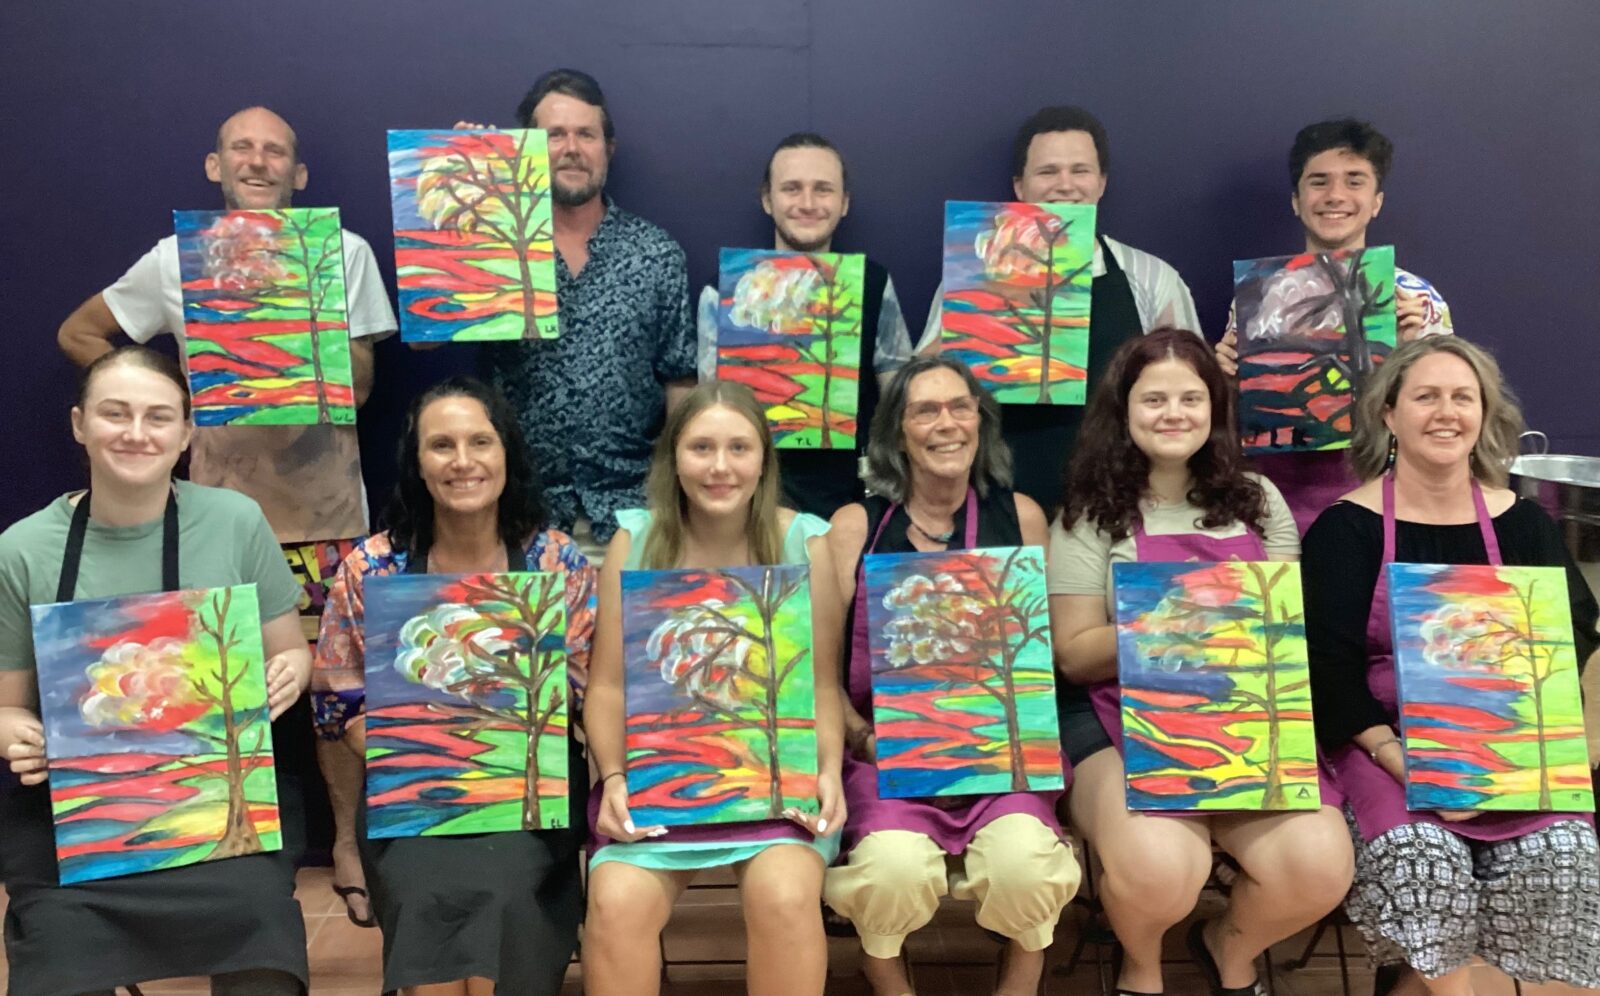 None of these people had ever painted before. The session was full of fun and laughter.